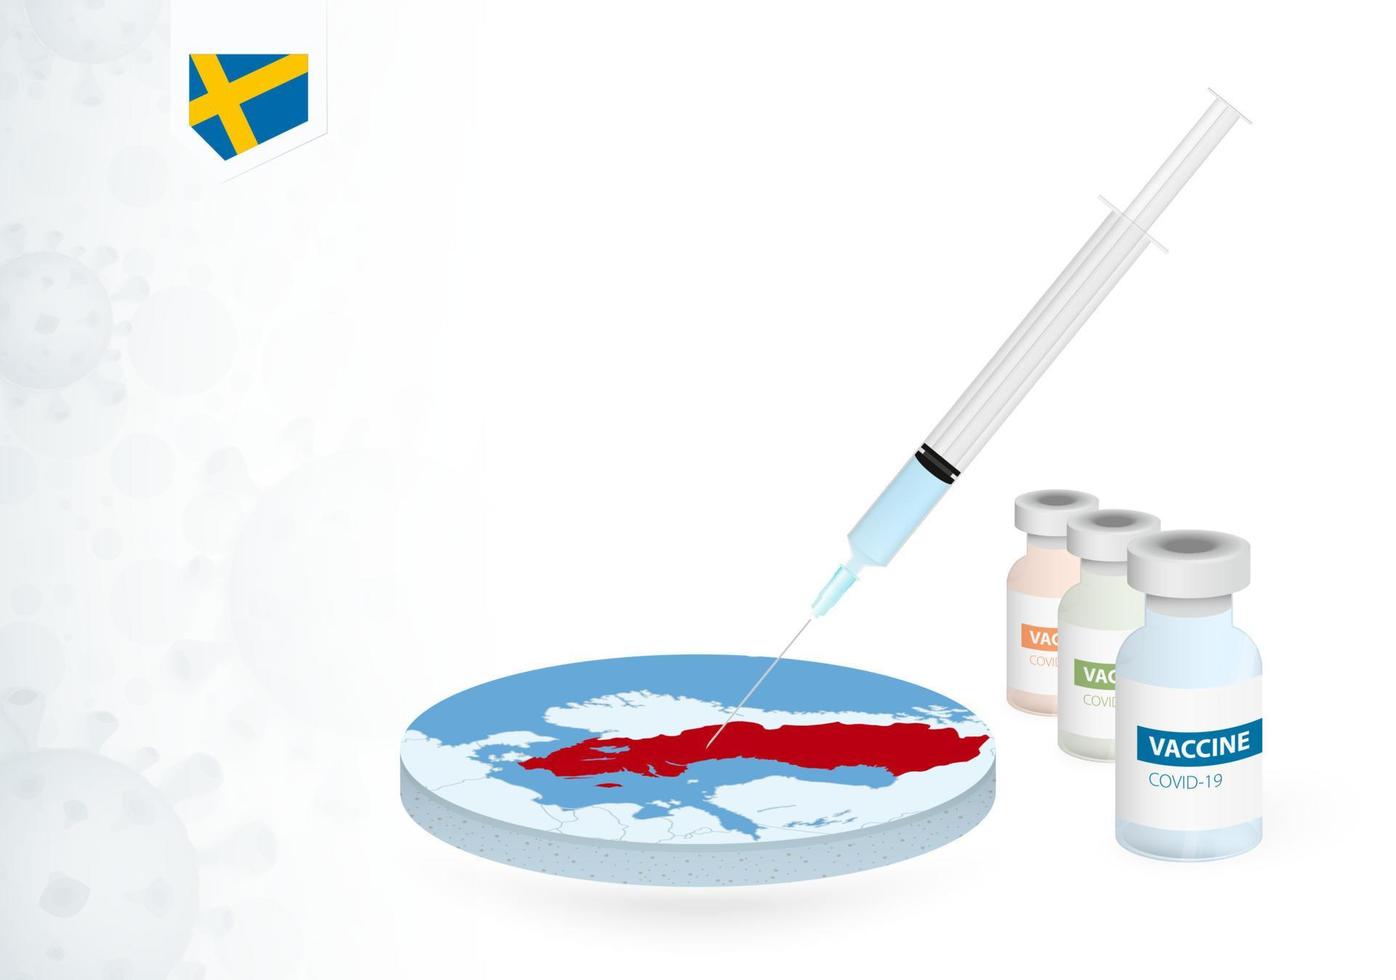 Vaccination in Sweden with different type of COVID-19 vaccine. Concept with the vaccine injection in the map of Sweden. vector